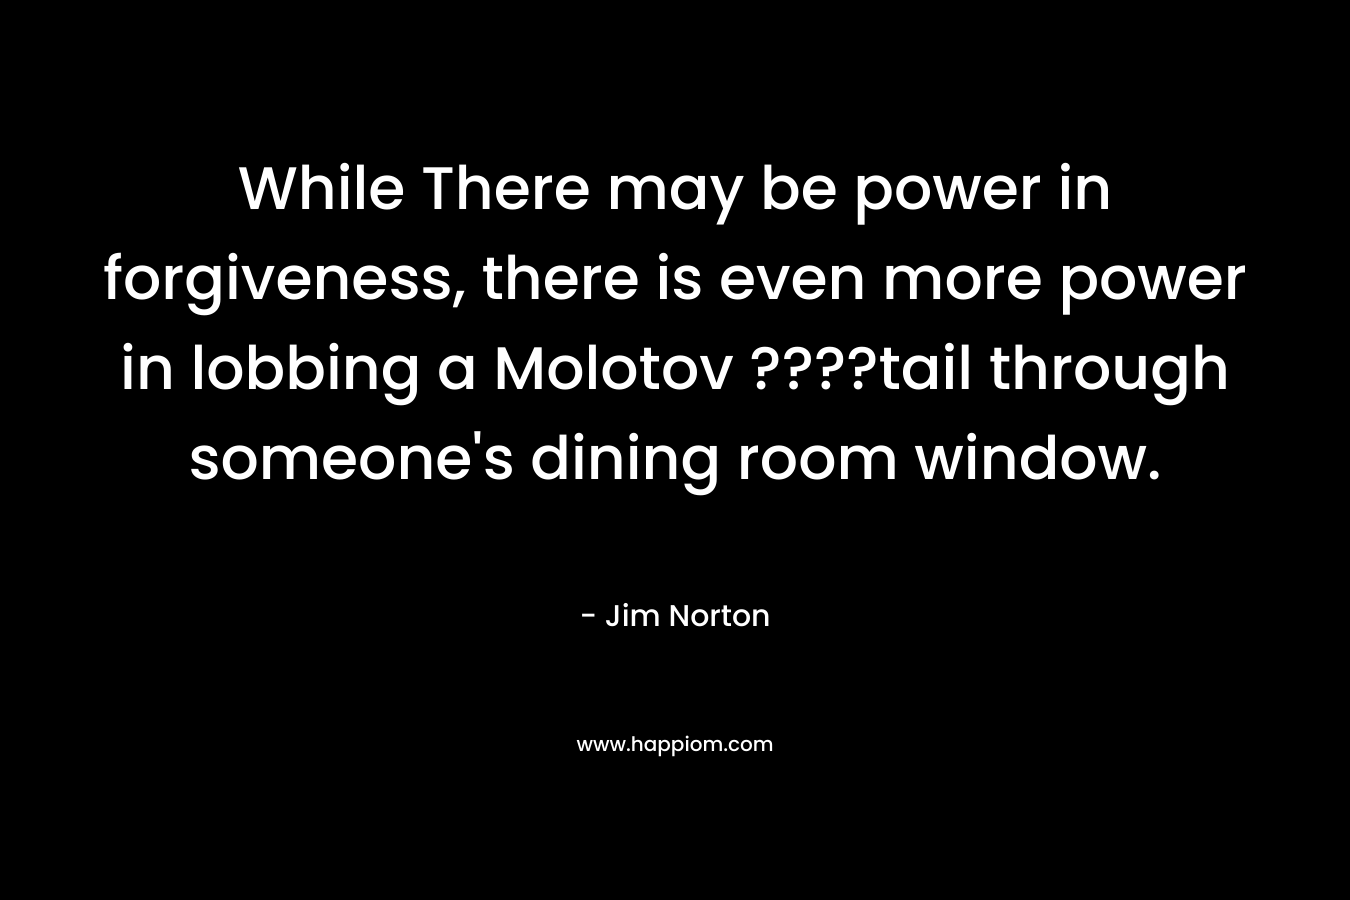 While There may be power in forgiveness, there is even more power in lobbing a Molotov ????tail through someone’s dining room window. – Jim Norton